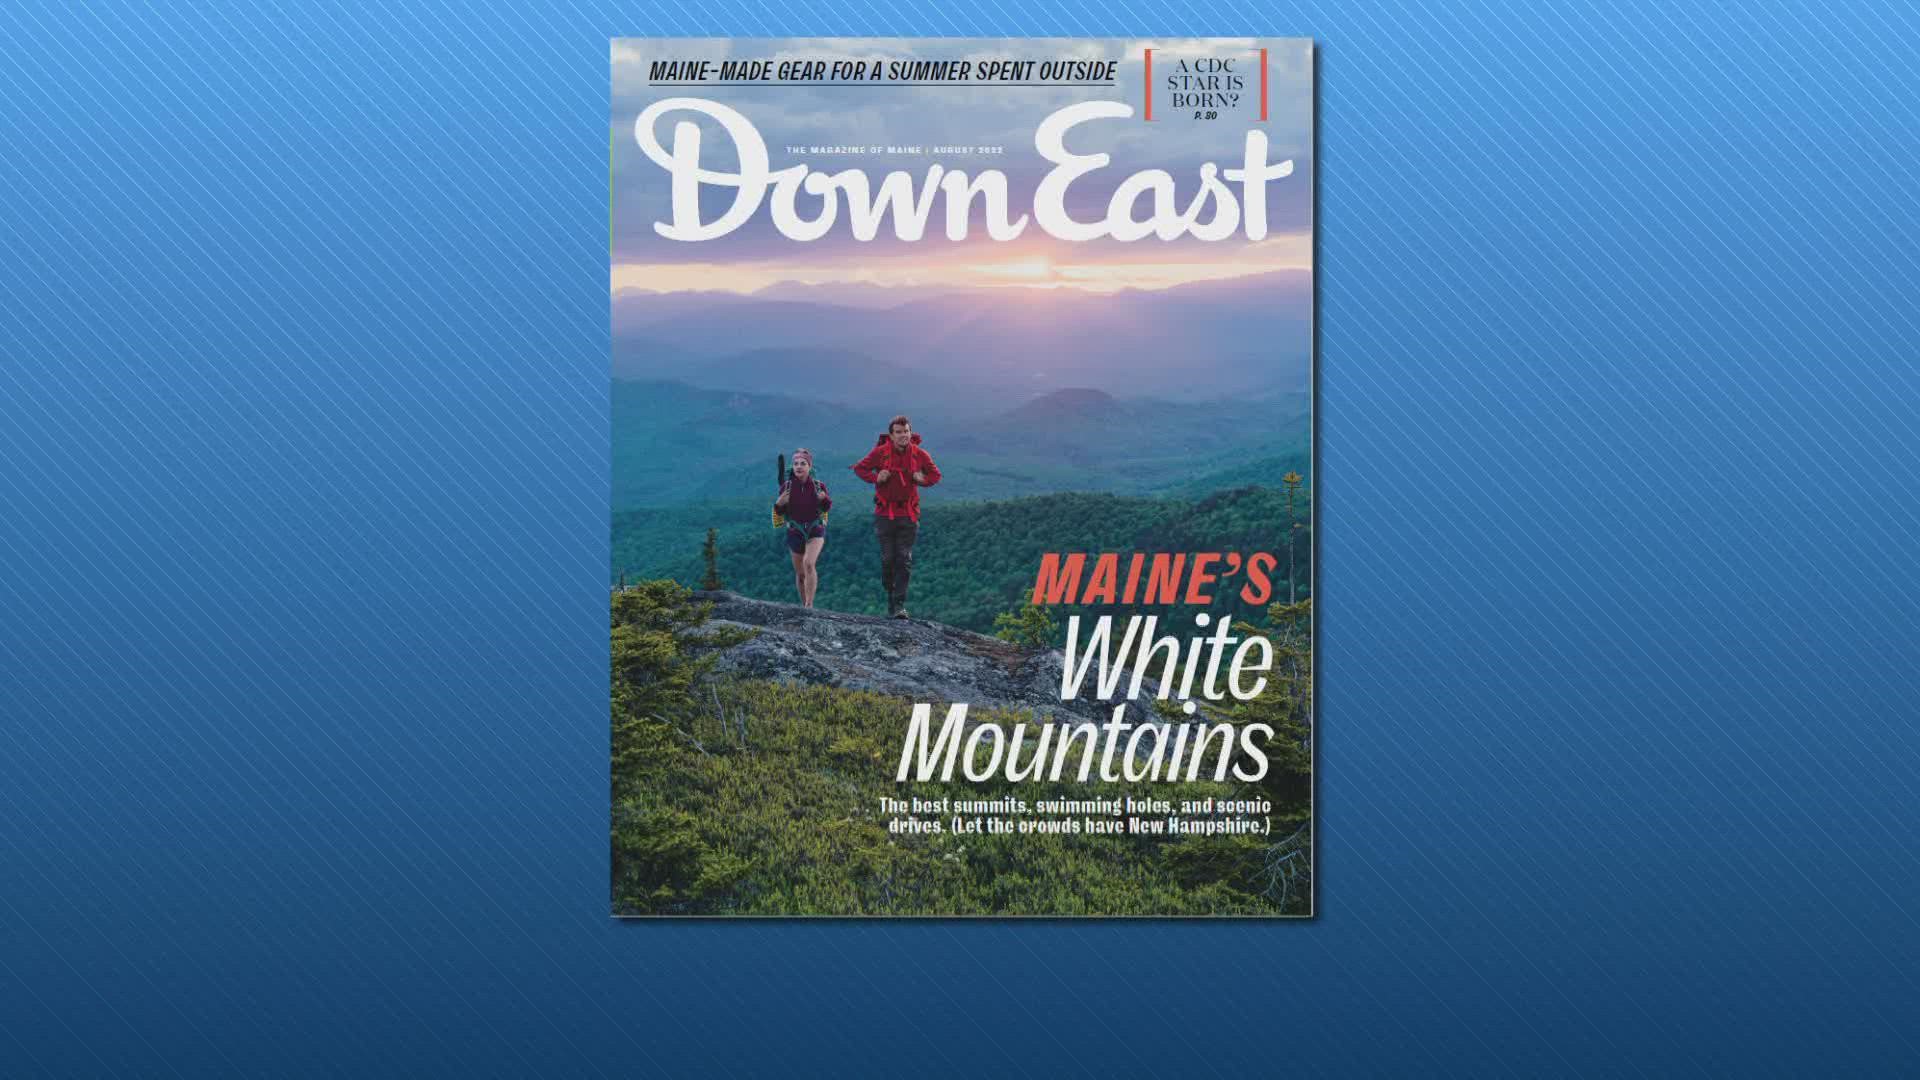 August’s edition of “Down East” magazine highlights a decades-old ice cream stand, the breathtaking views of the White Mountains, a profile on Dr. Shah, and more.